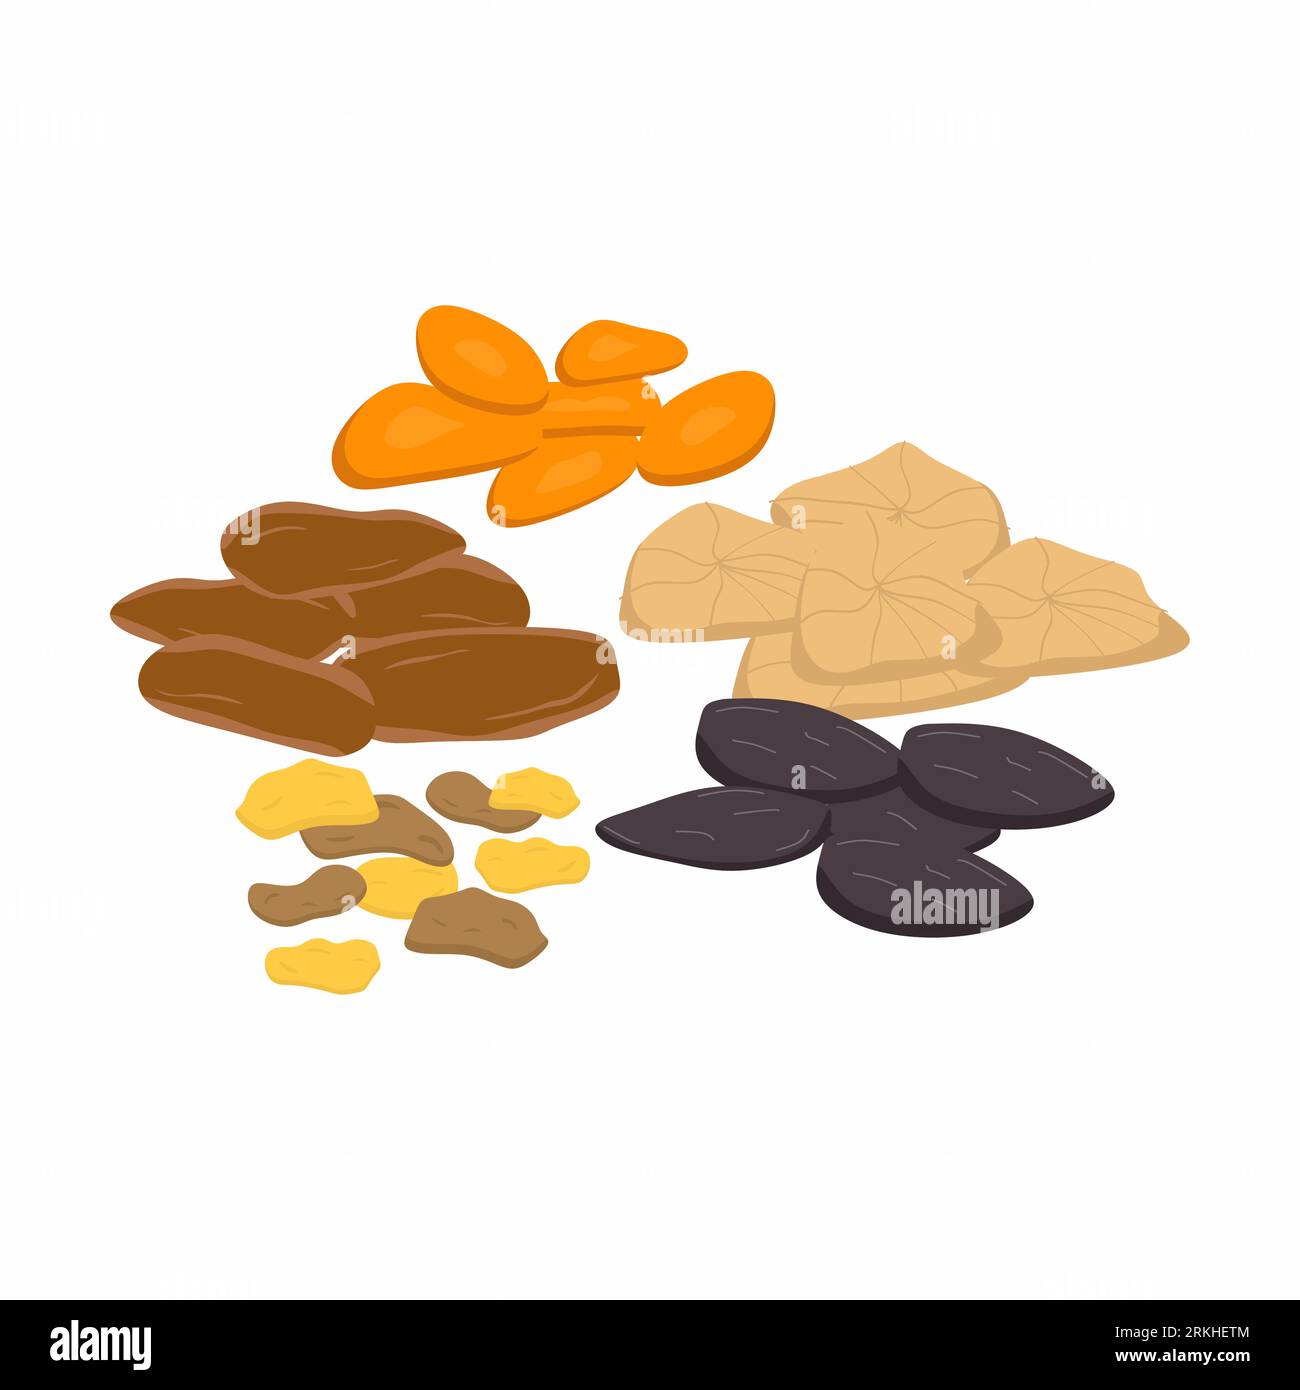 Mix of dried fruits nuts and seeds isolated on a white background. Vegetarian, healthy organic food concept. Vector icon illustration of natural sweet Stock Vector